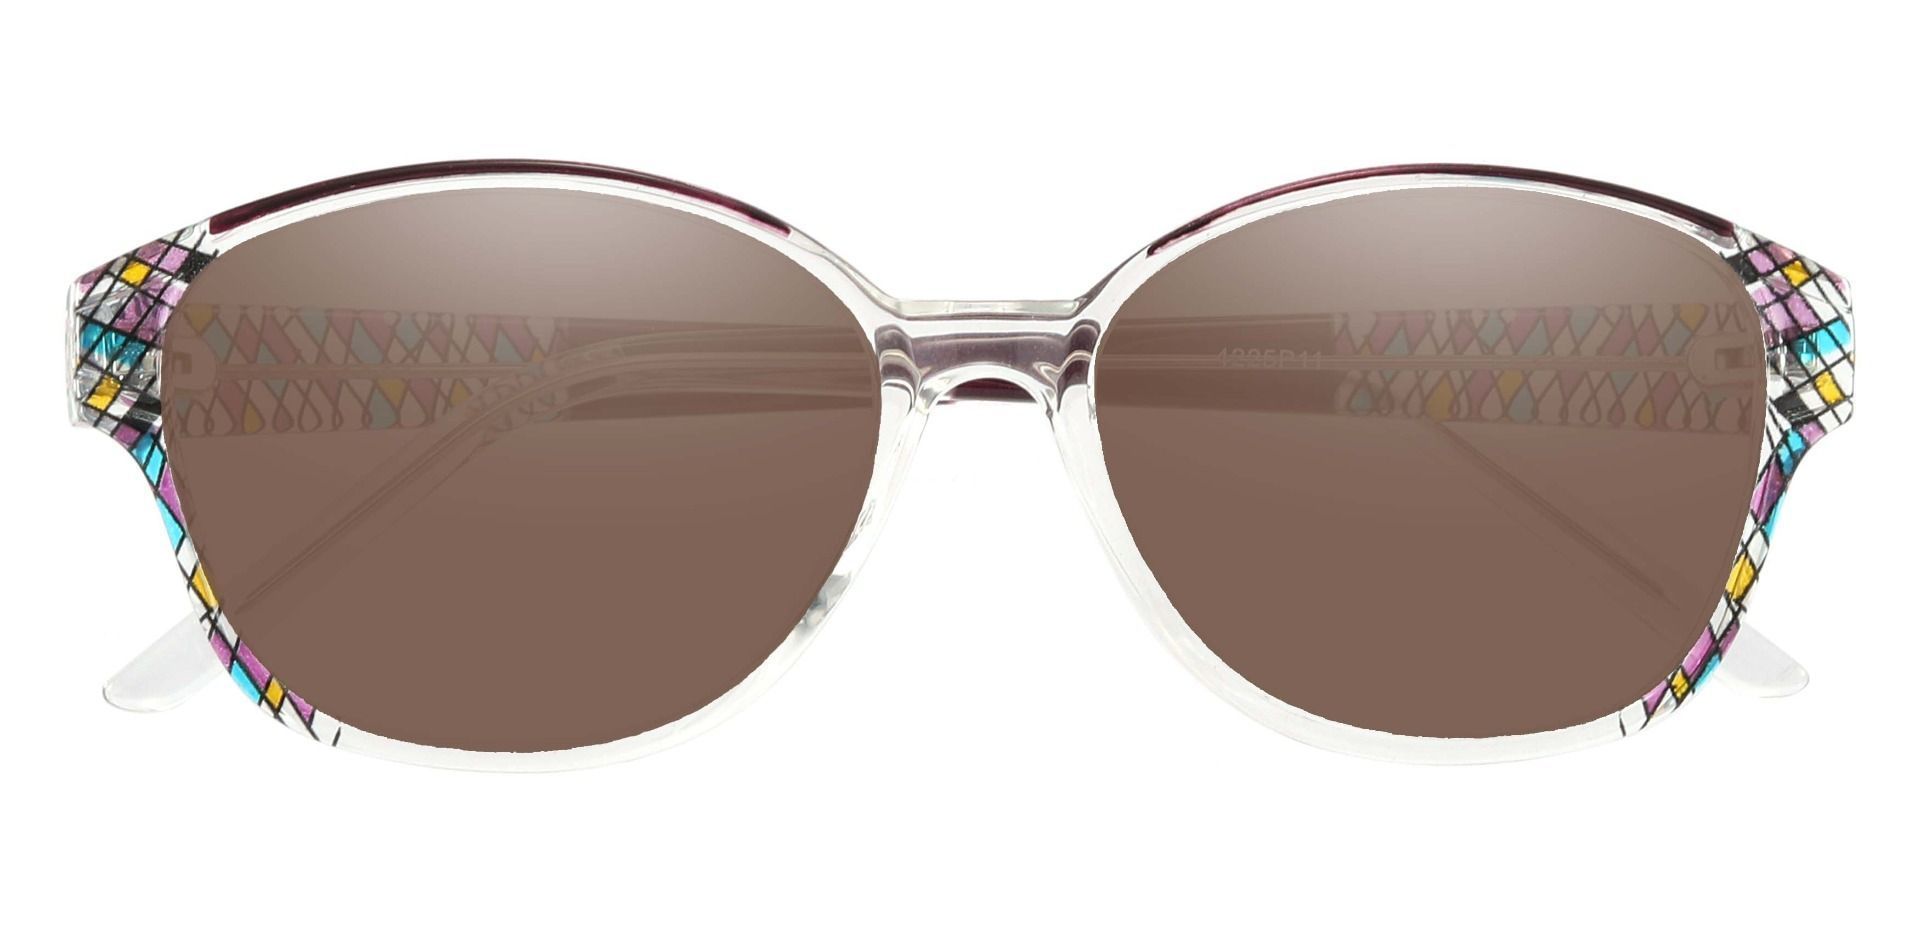 Moira Oval Reading Sunglasses - Purple Frame With Brown Lenses